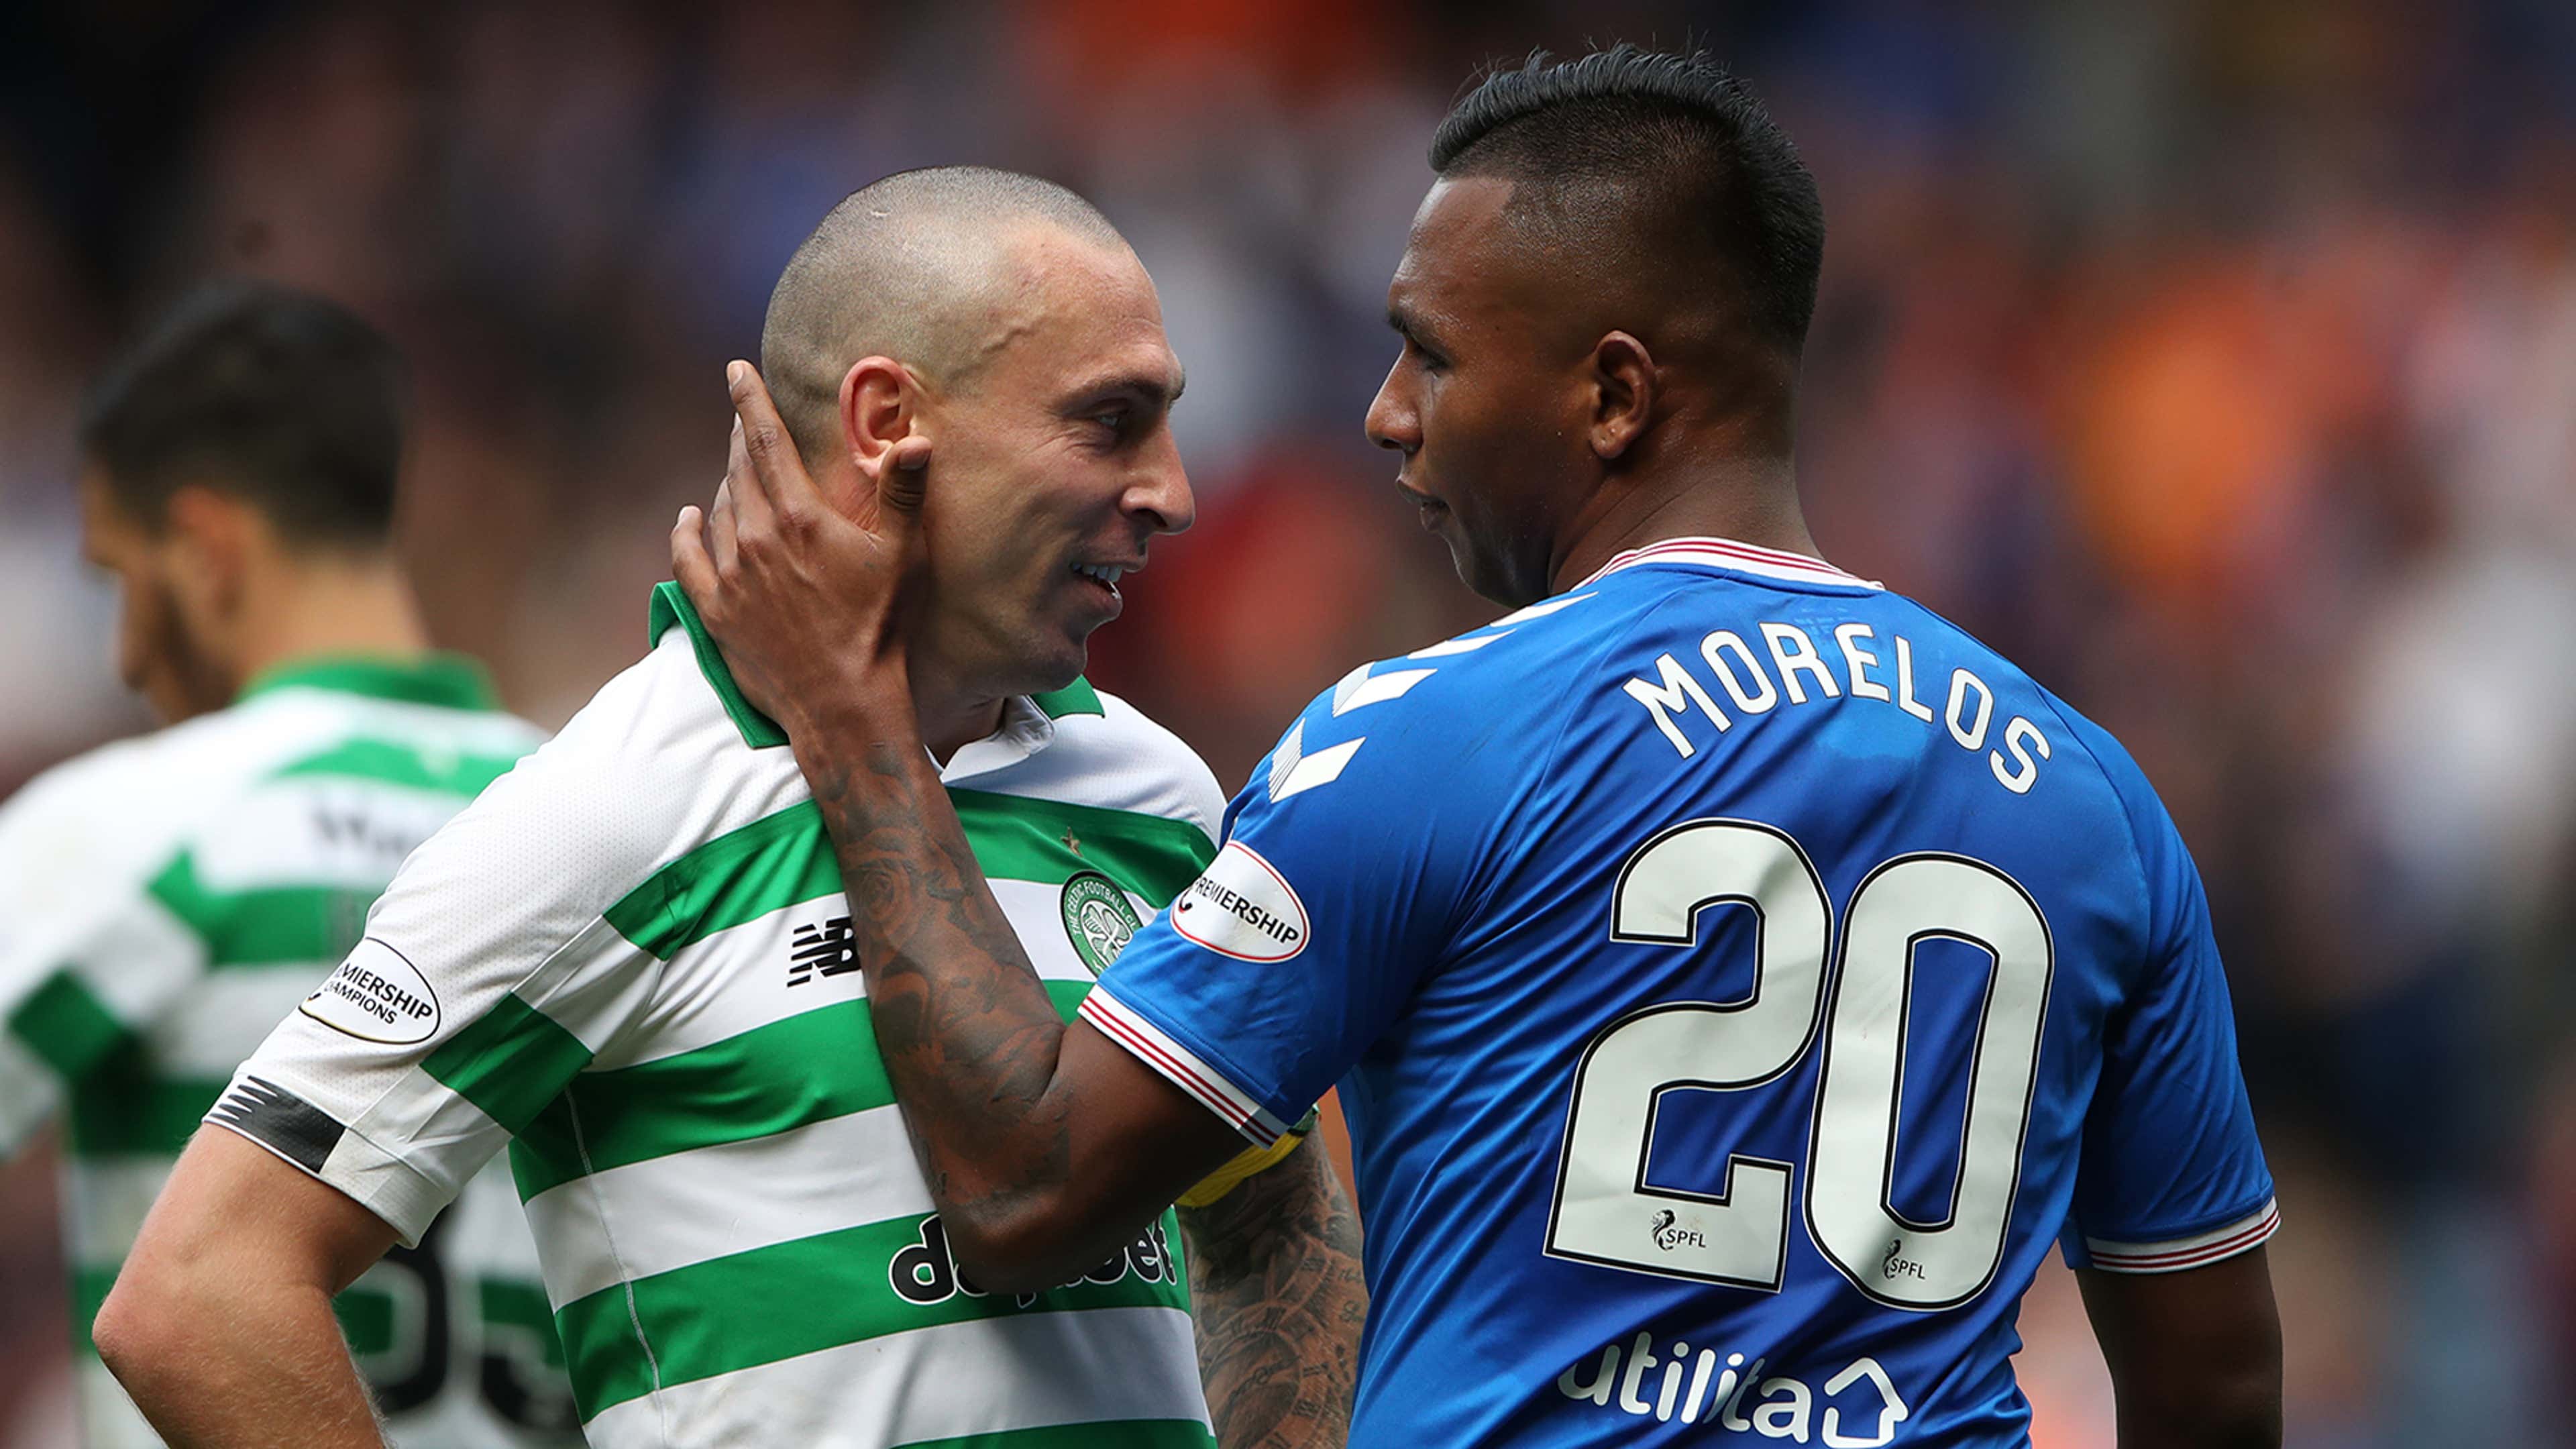 Rangers remain top with statement win in Old Firm derby against